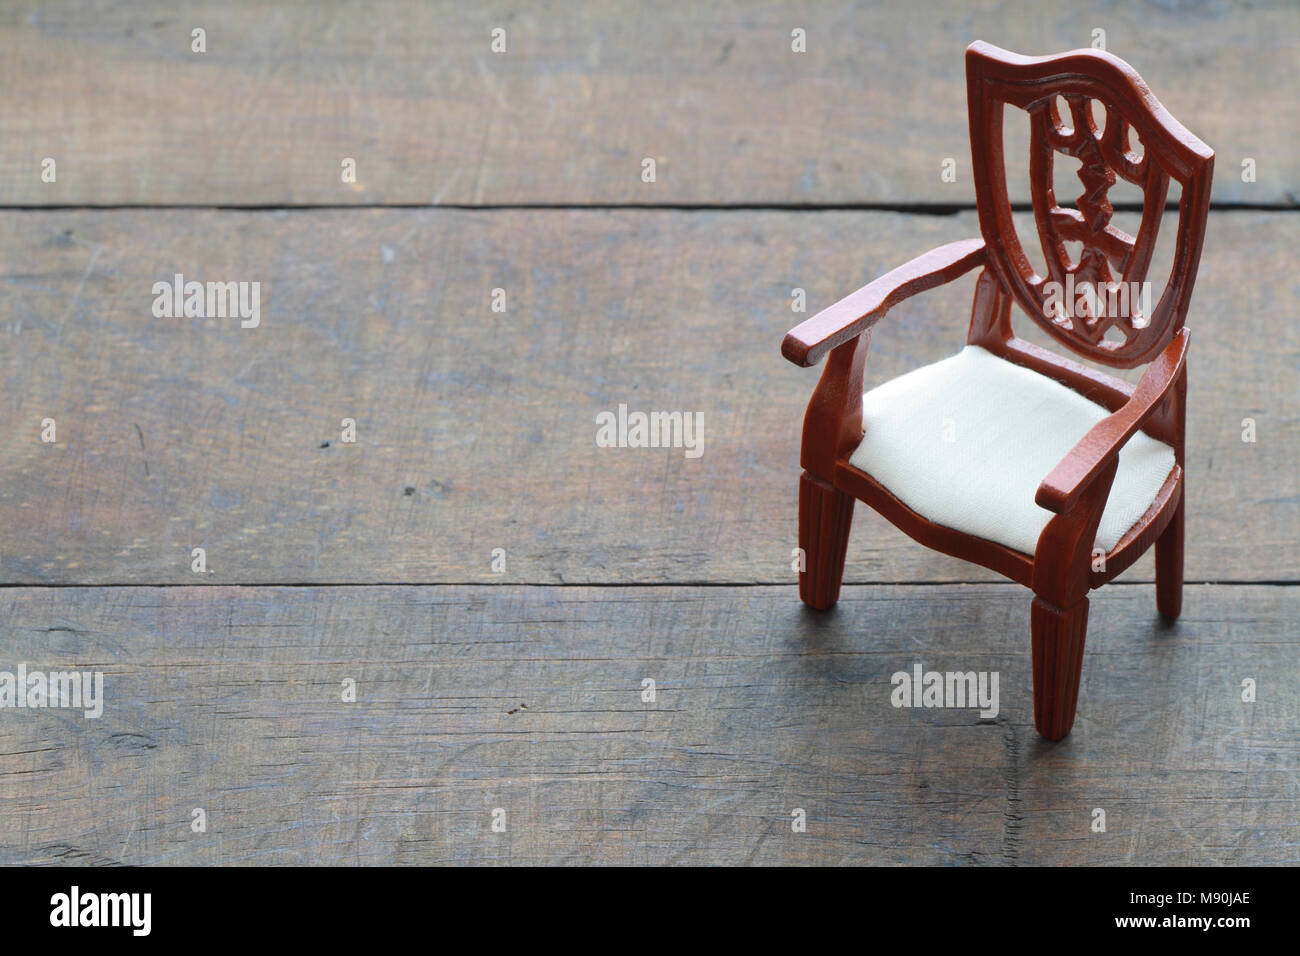 Toy wooden chair standing on wooden background with copy space Stock Photo